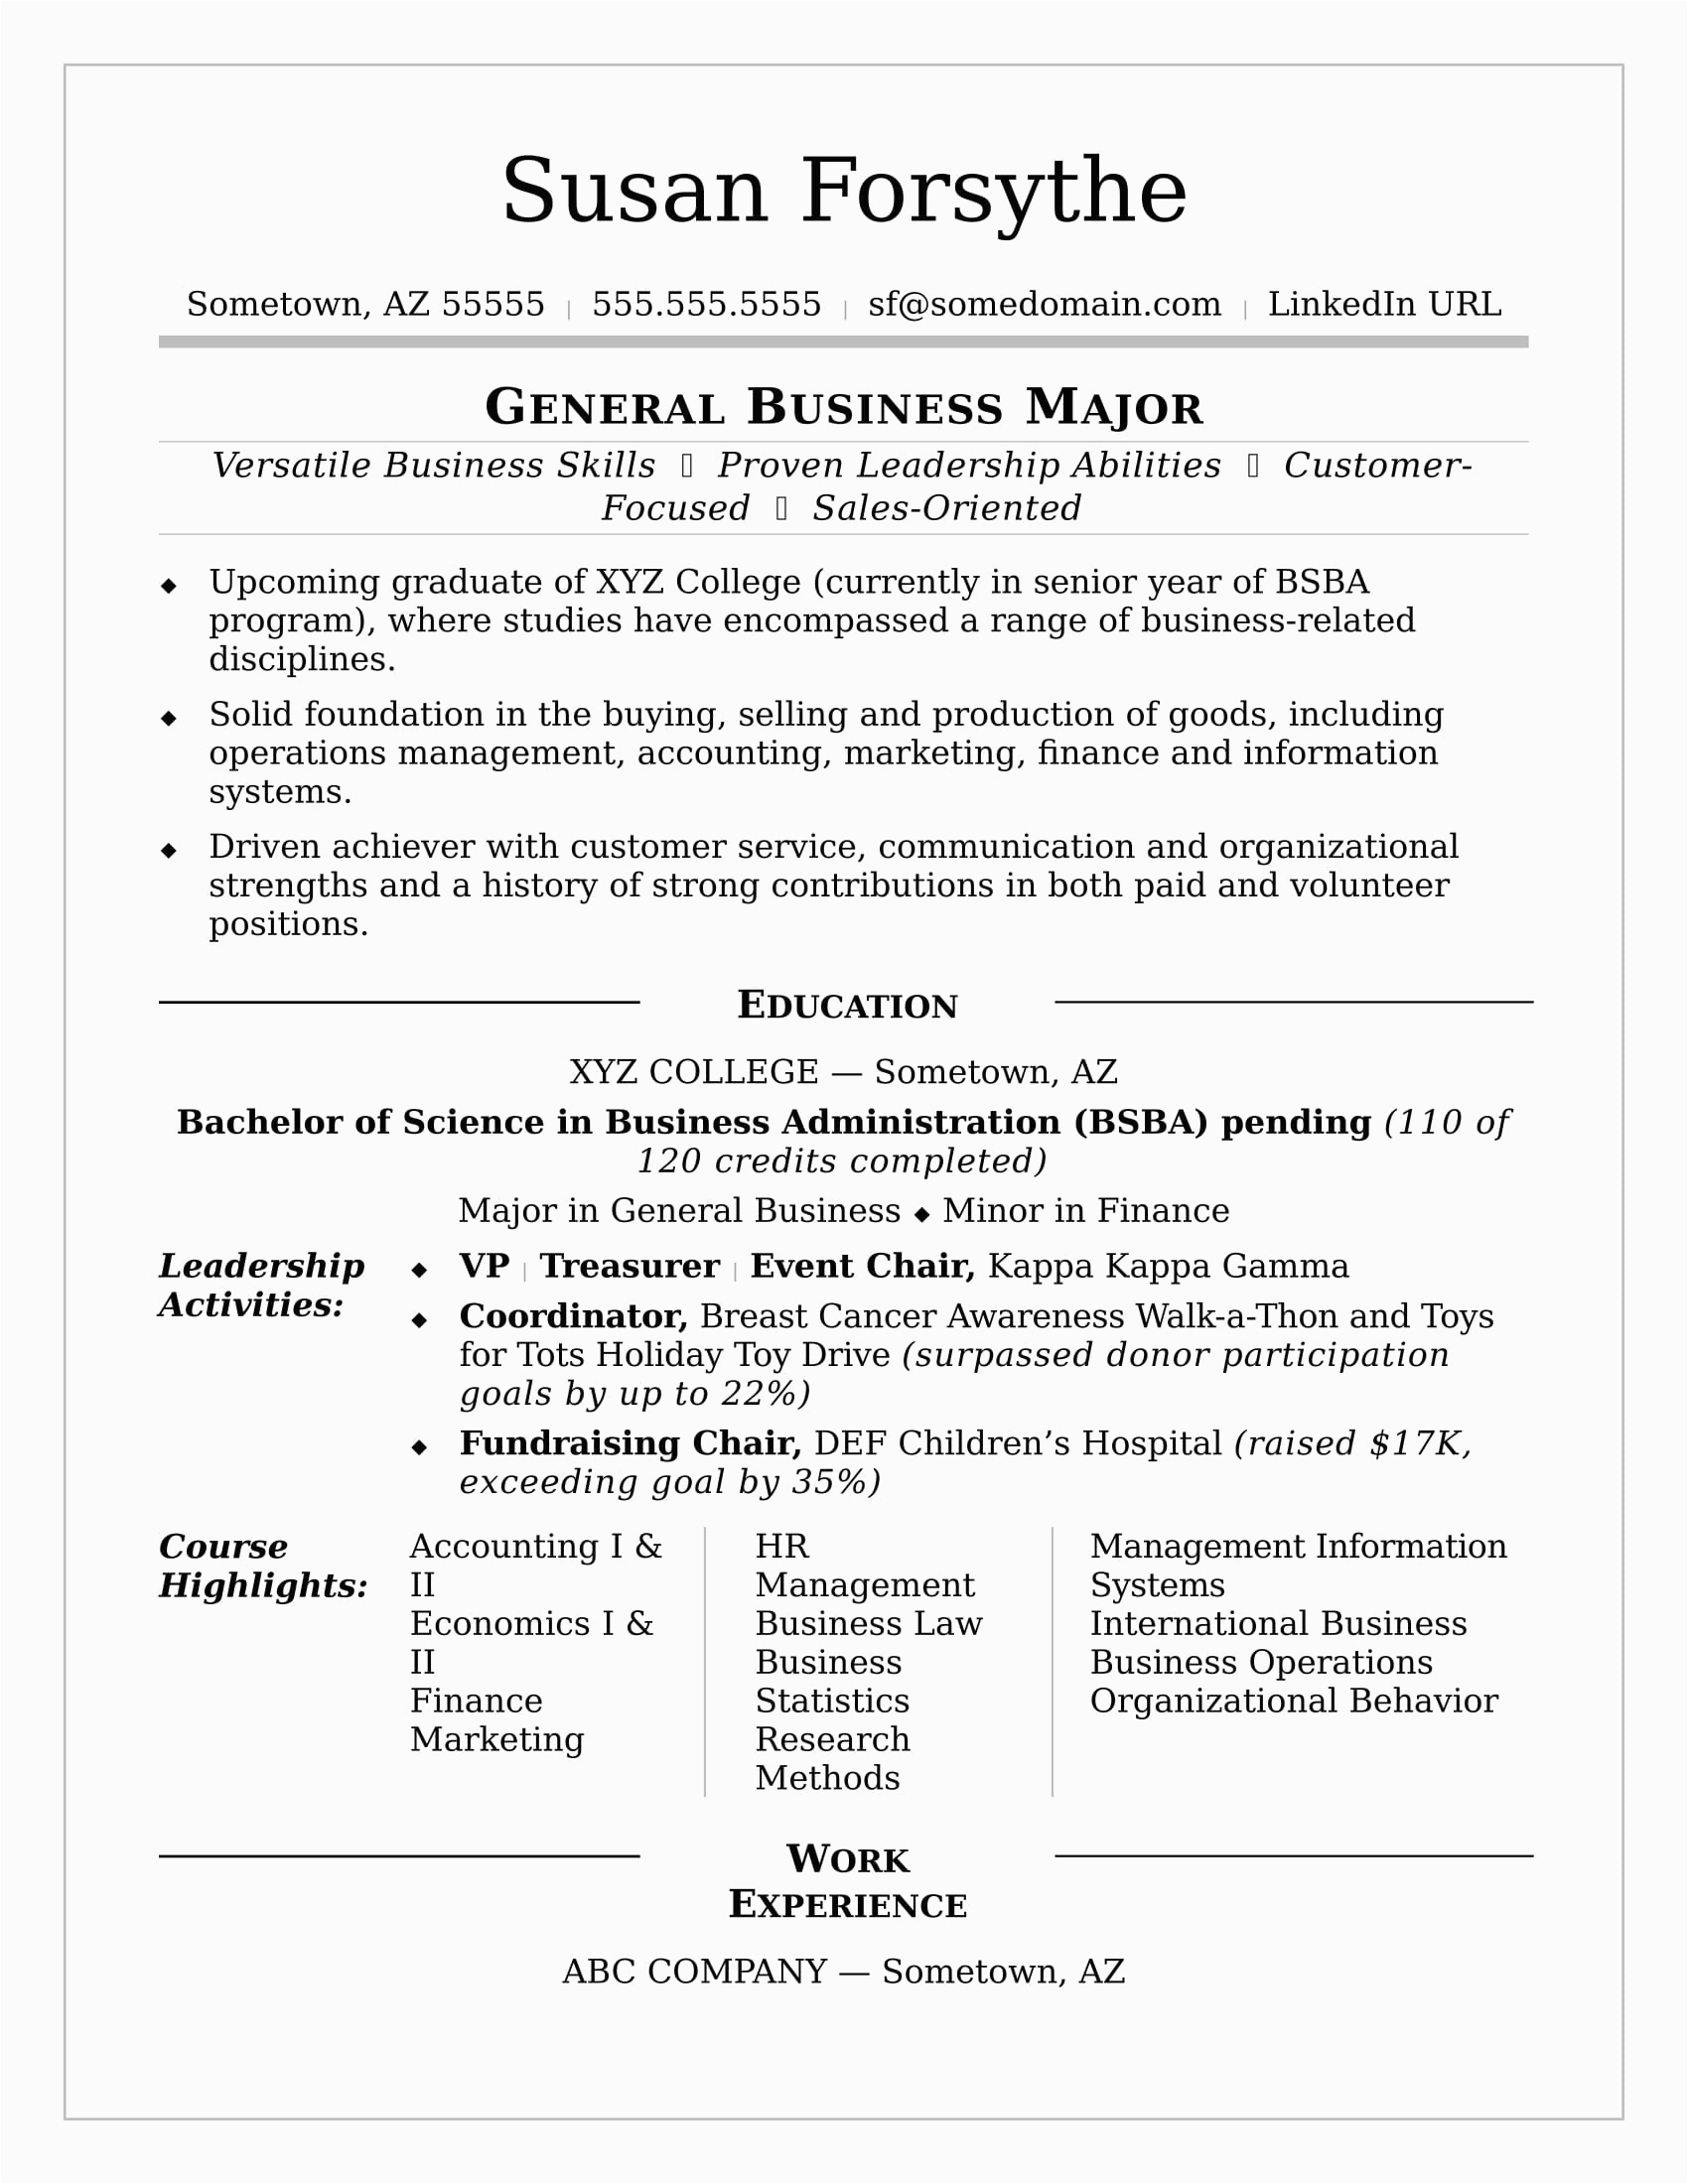 Sample Resume Skills for College Students College Student Resume Examples